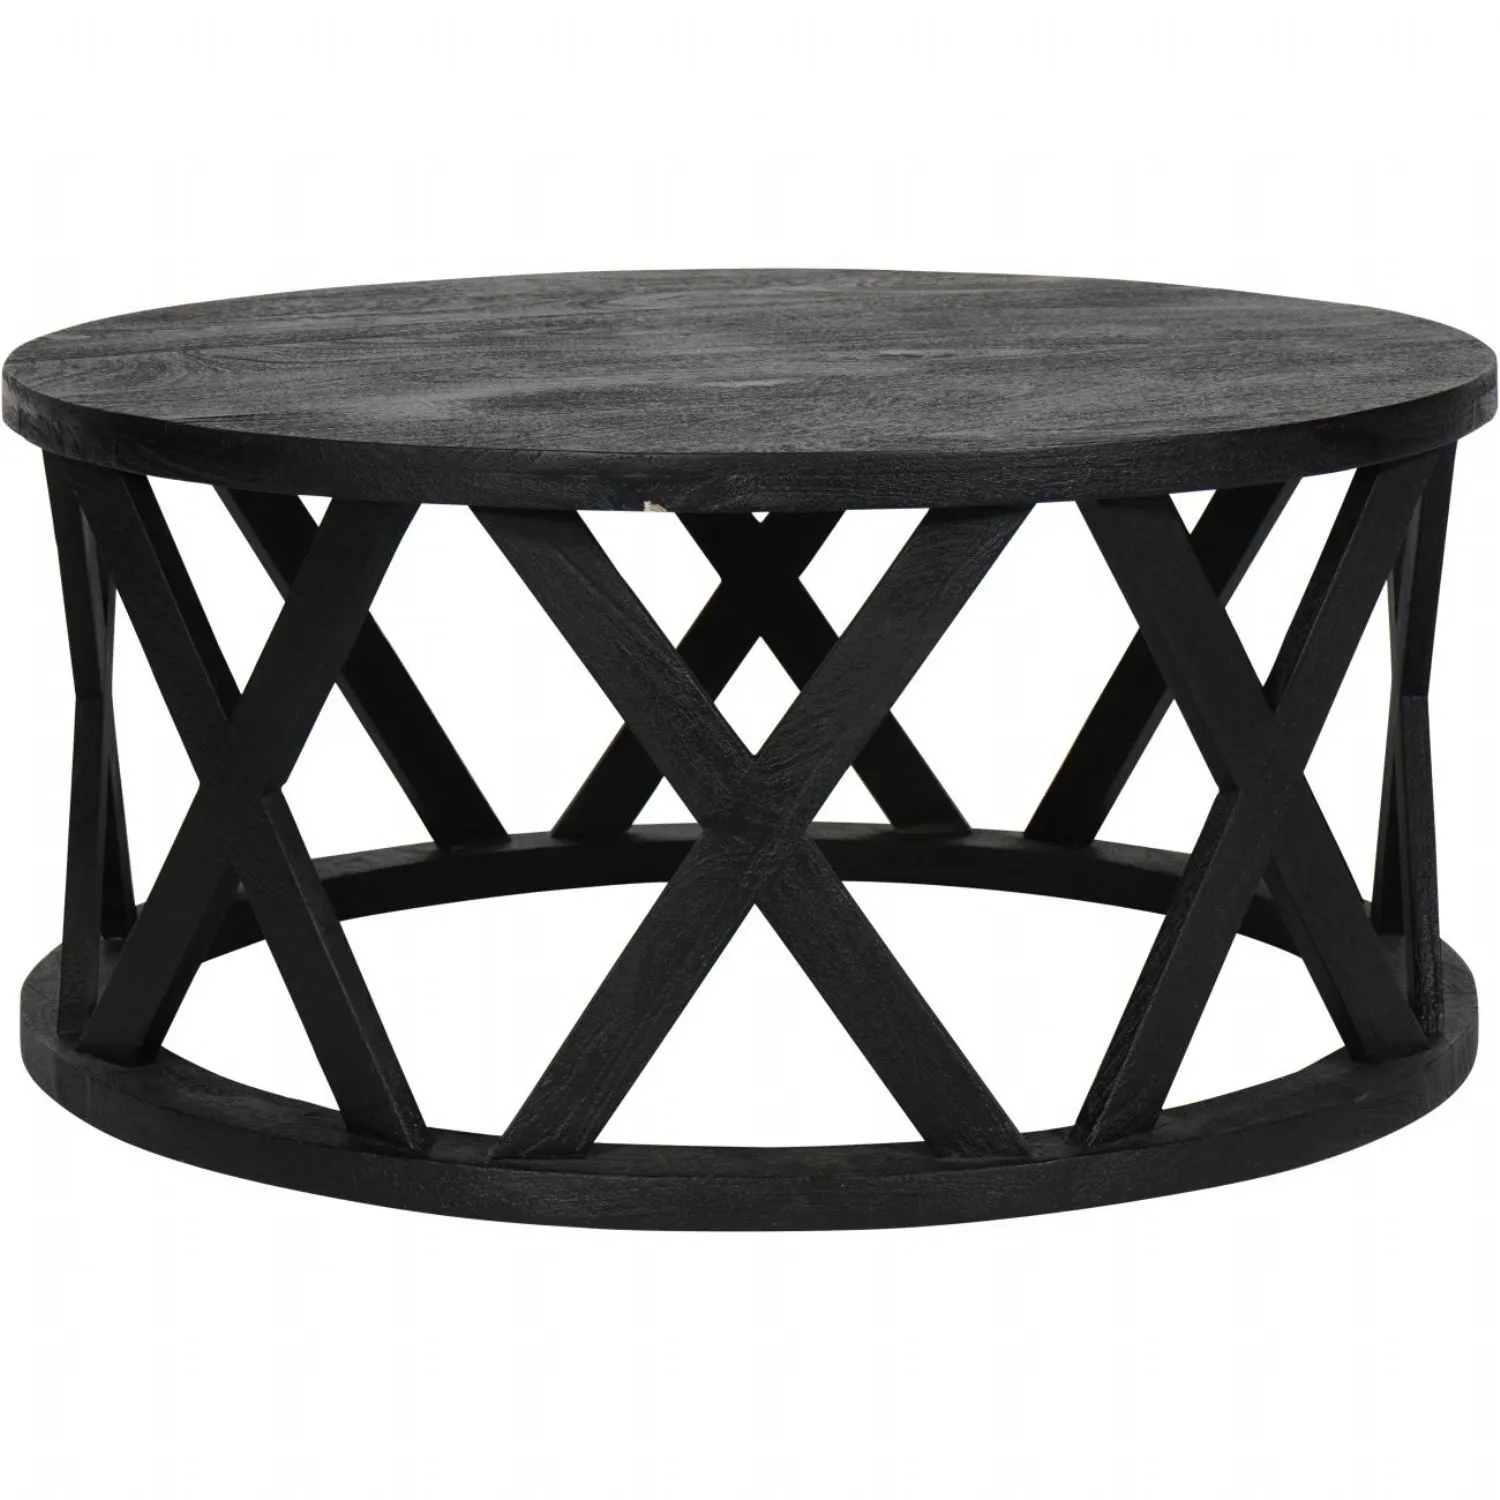 Black Solid Wood Criss Cross 75cm Round Coffee Table